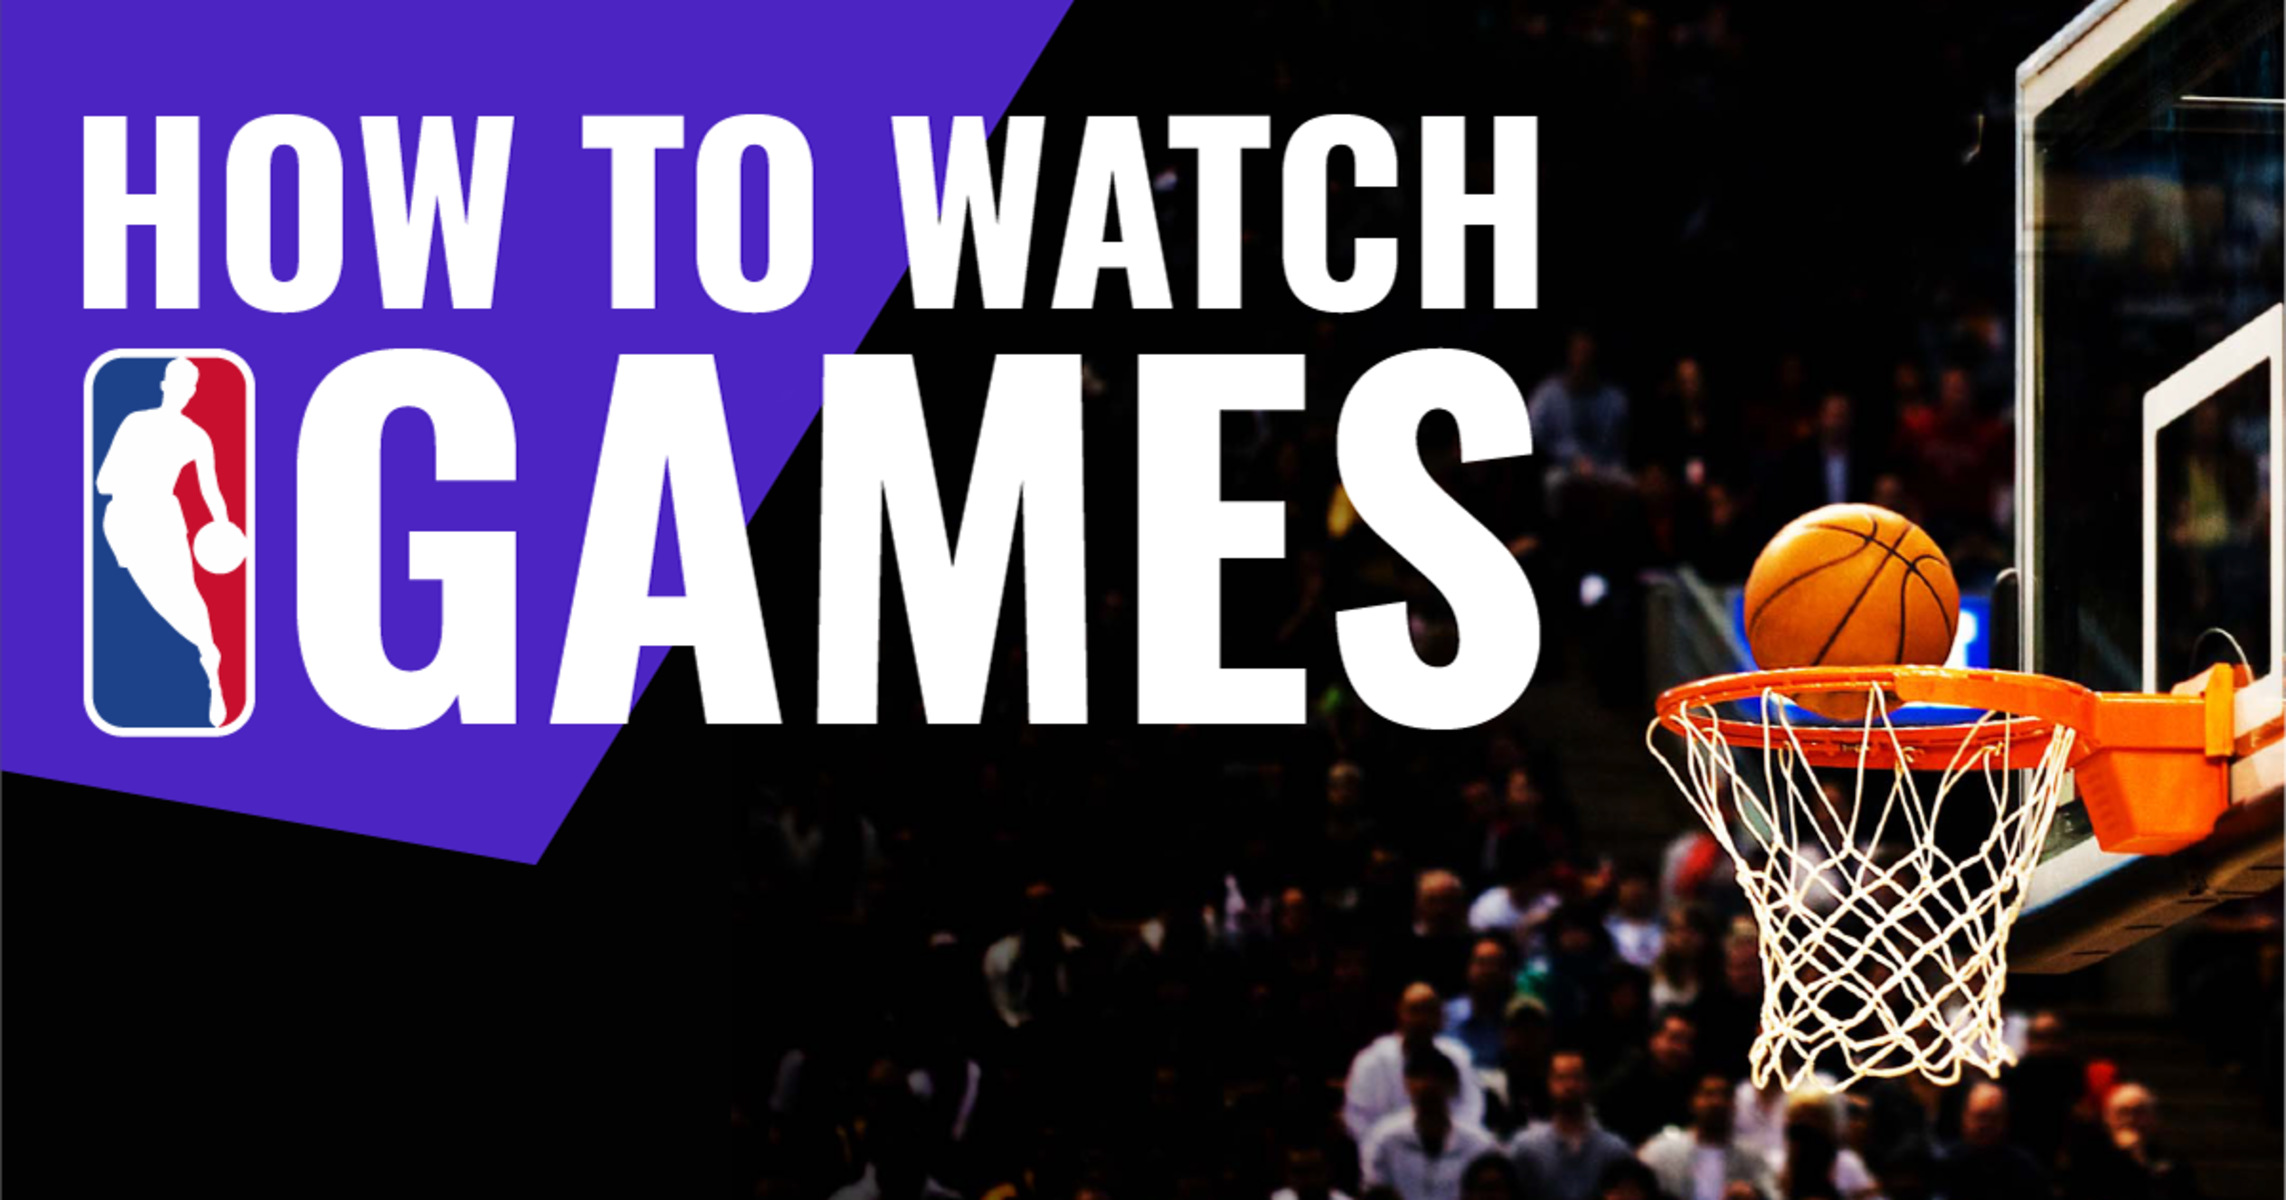 How To Watch Nba Games For Free